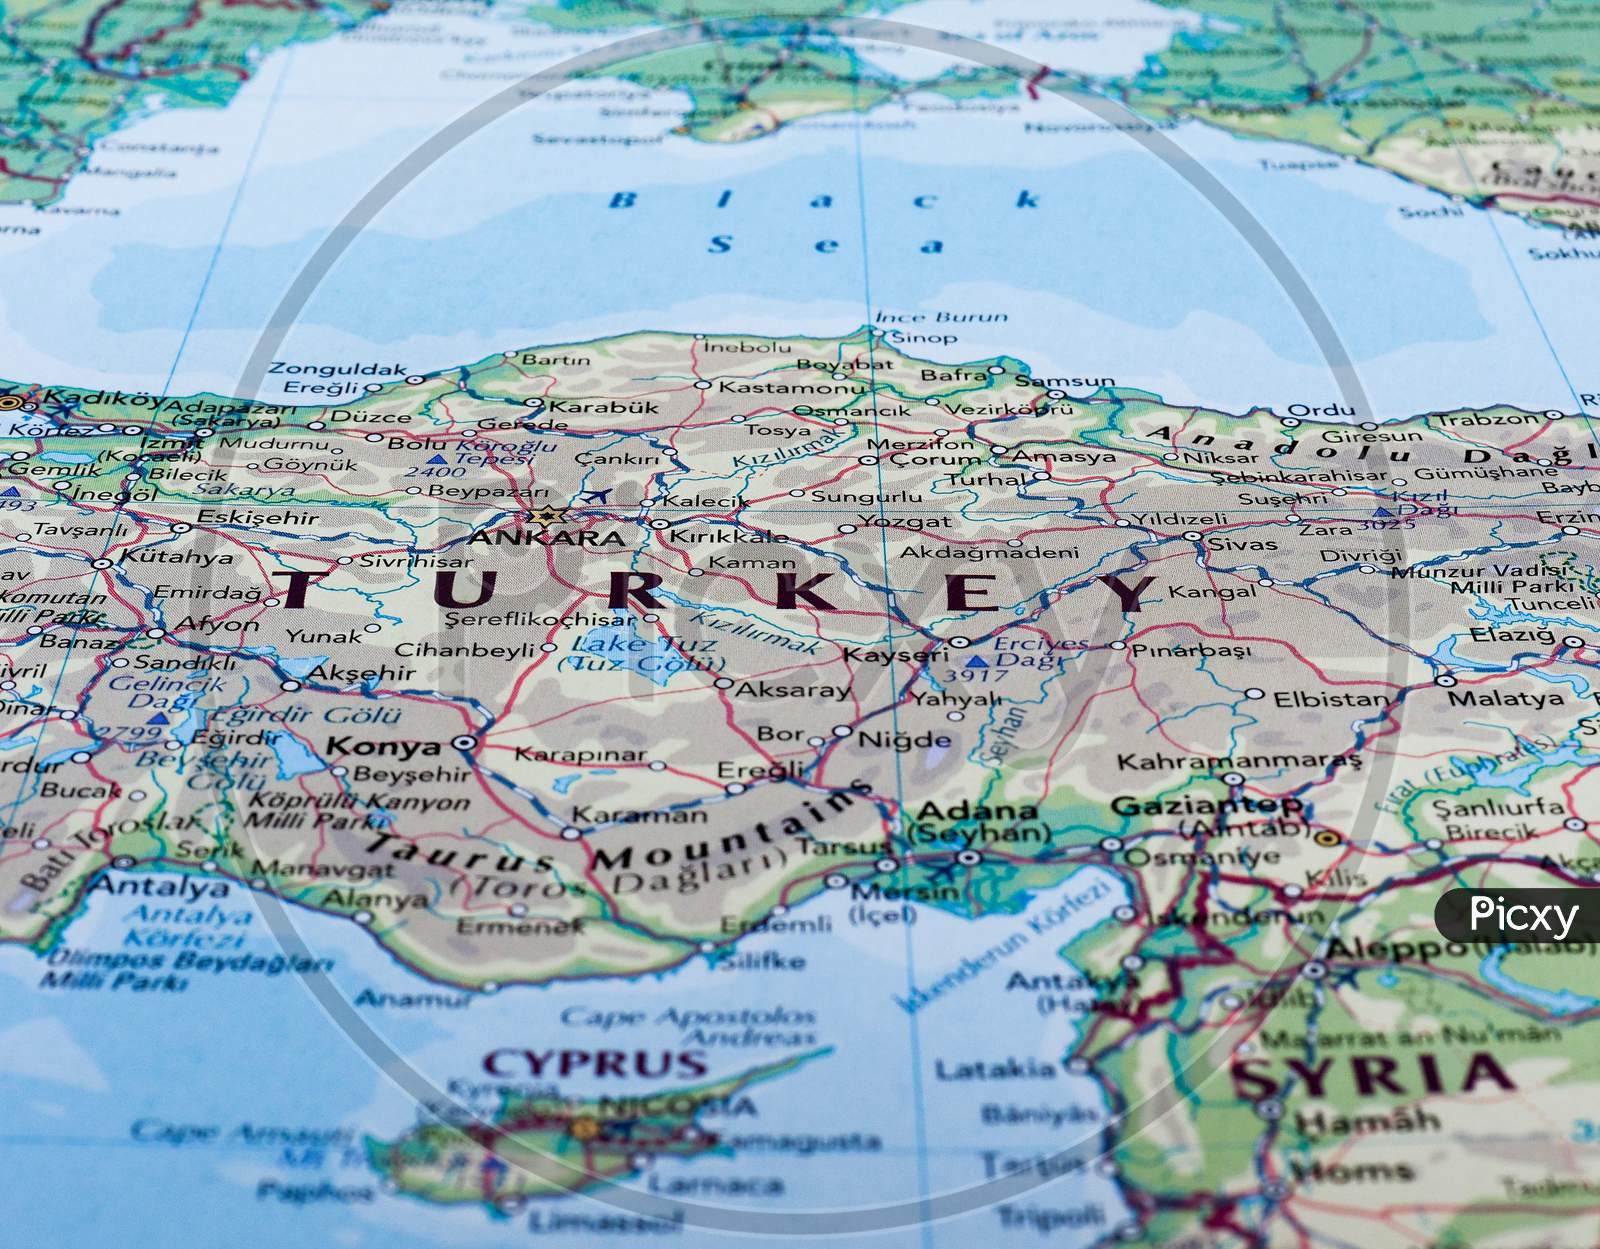 Ankara, Turkey - Circa May 2016: Map Of Turkey With Selective Focus On Name Of Country